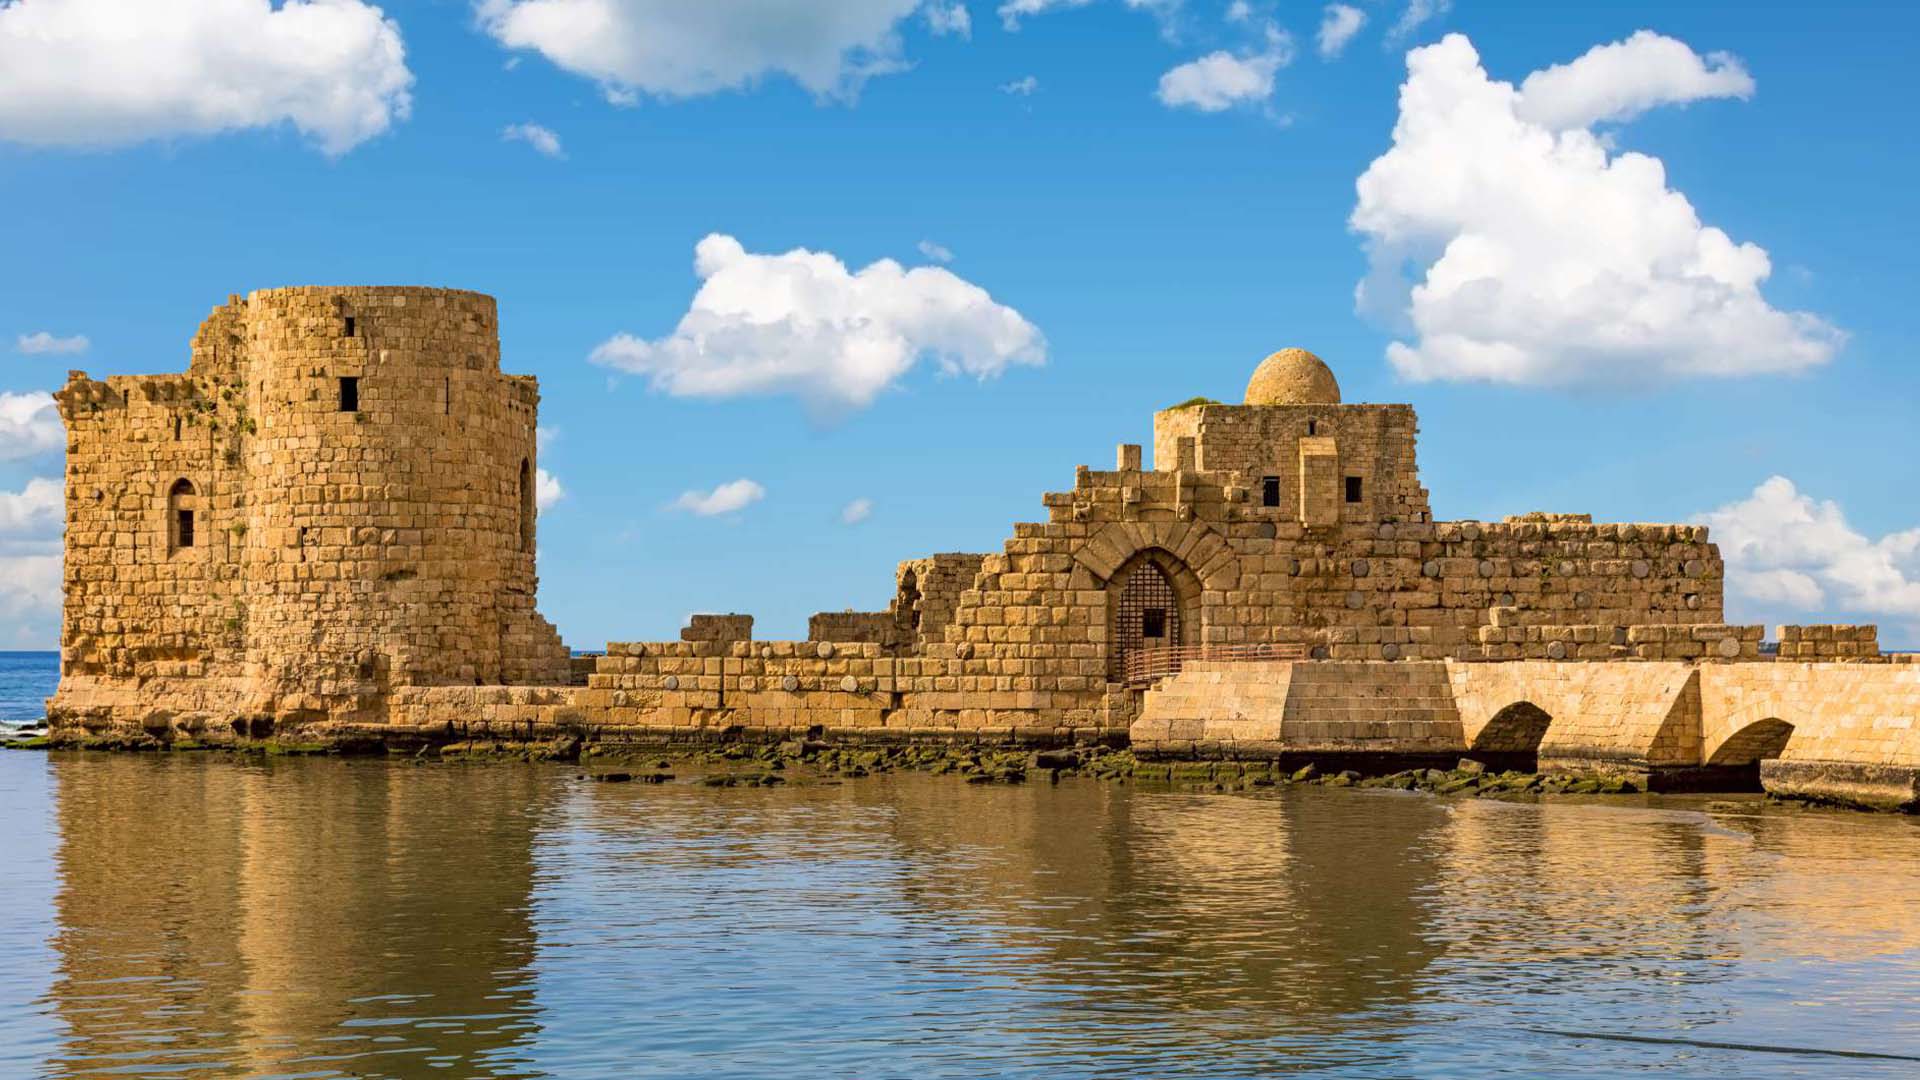 A photograph captures the Sea Castle of Sidon, perched on a small island in the midst of the Mediterranean Sea and linked to the mainland by a slender causeway.